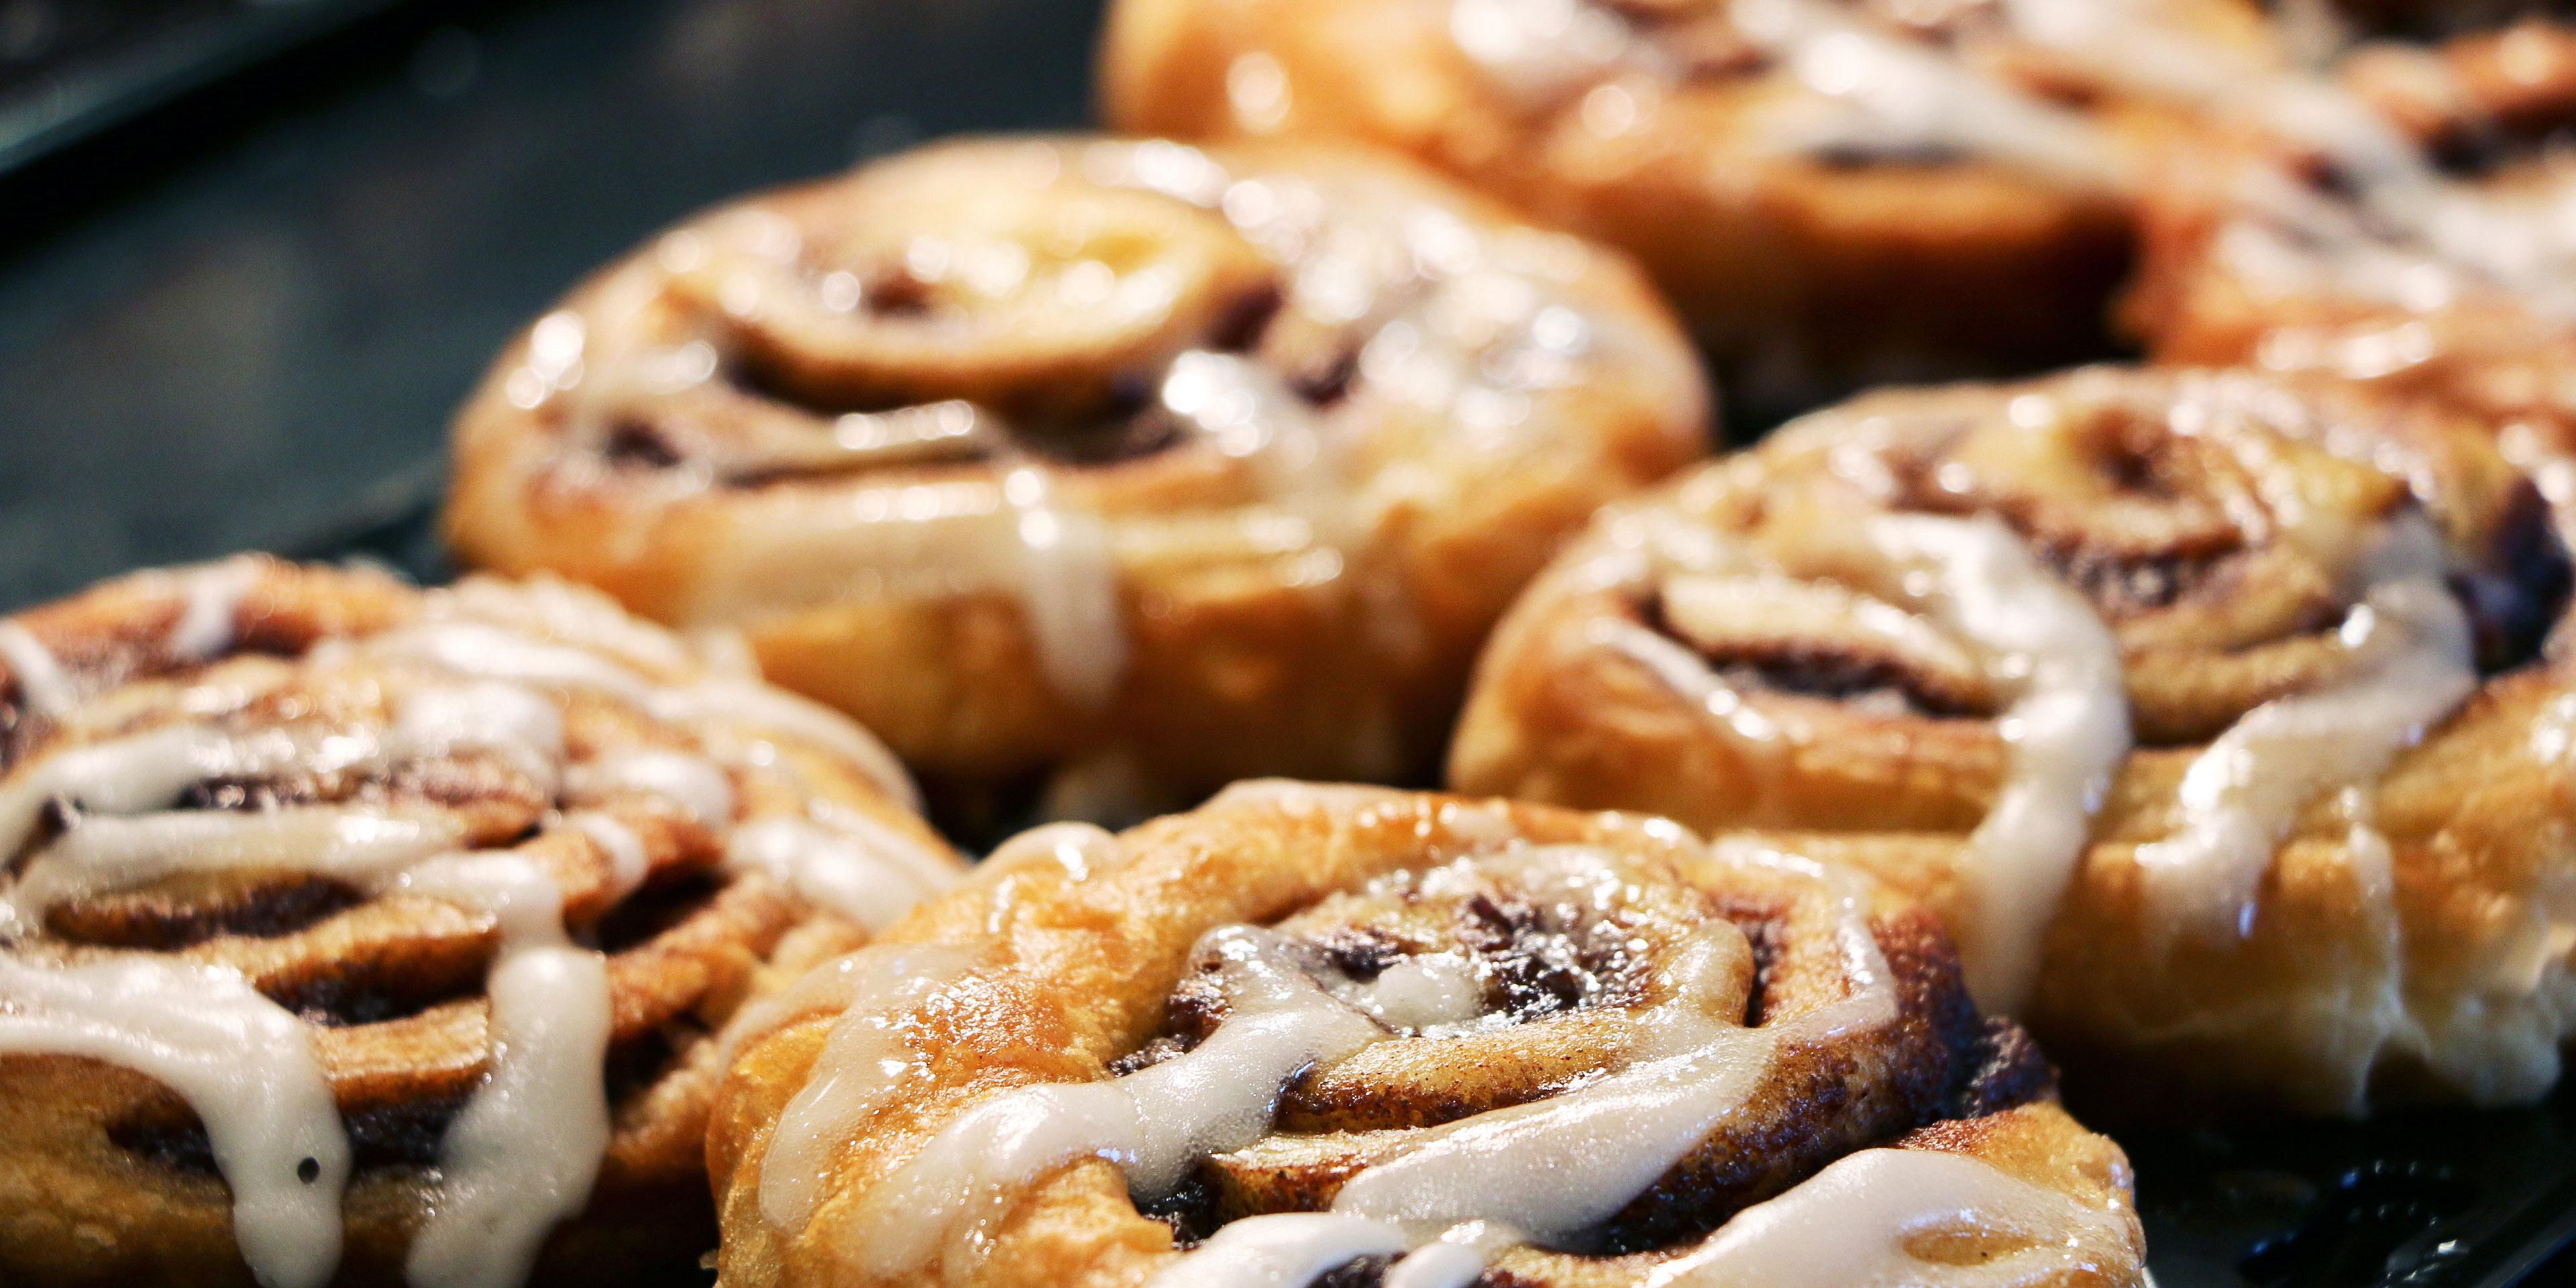 Try a famous cinnamon roll from the complimentary hot breakfast buffet.